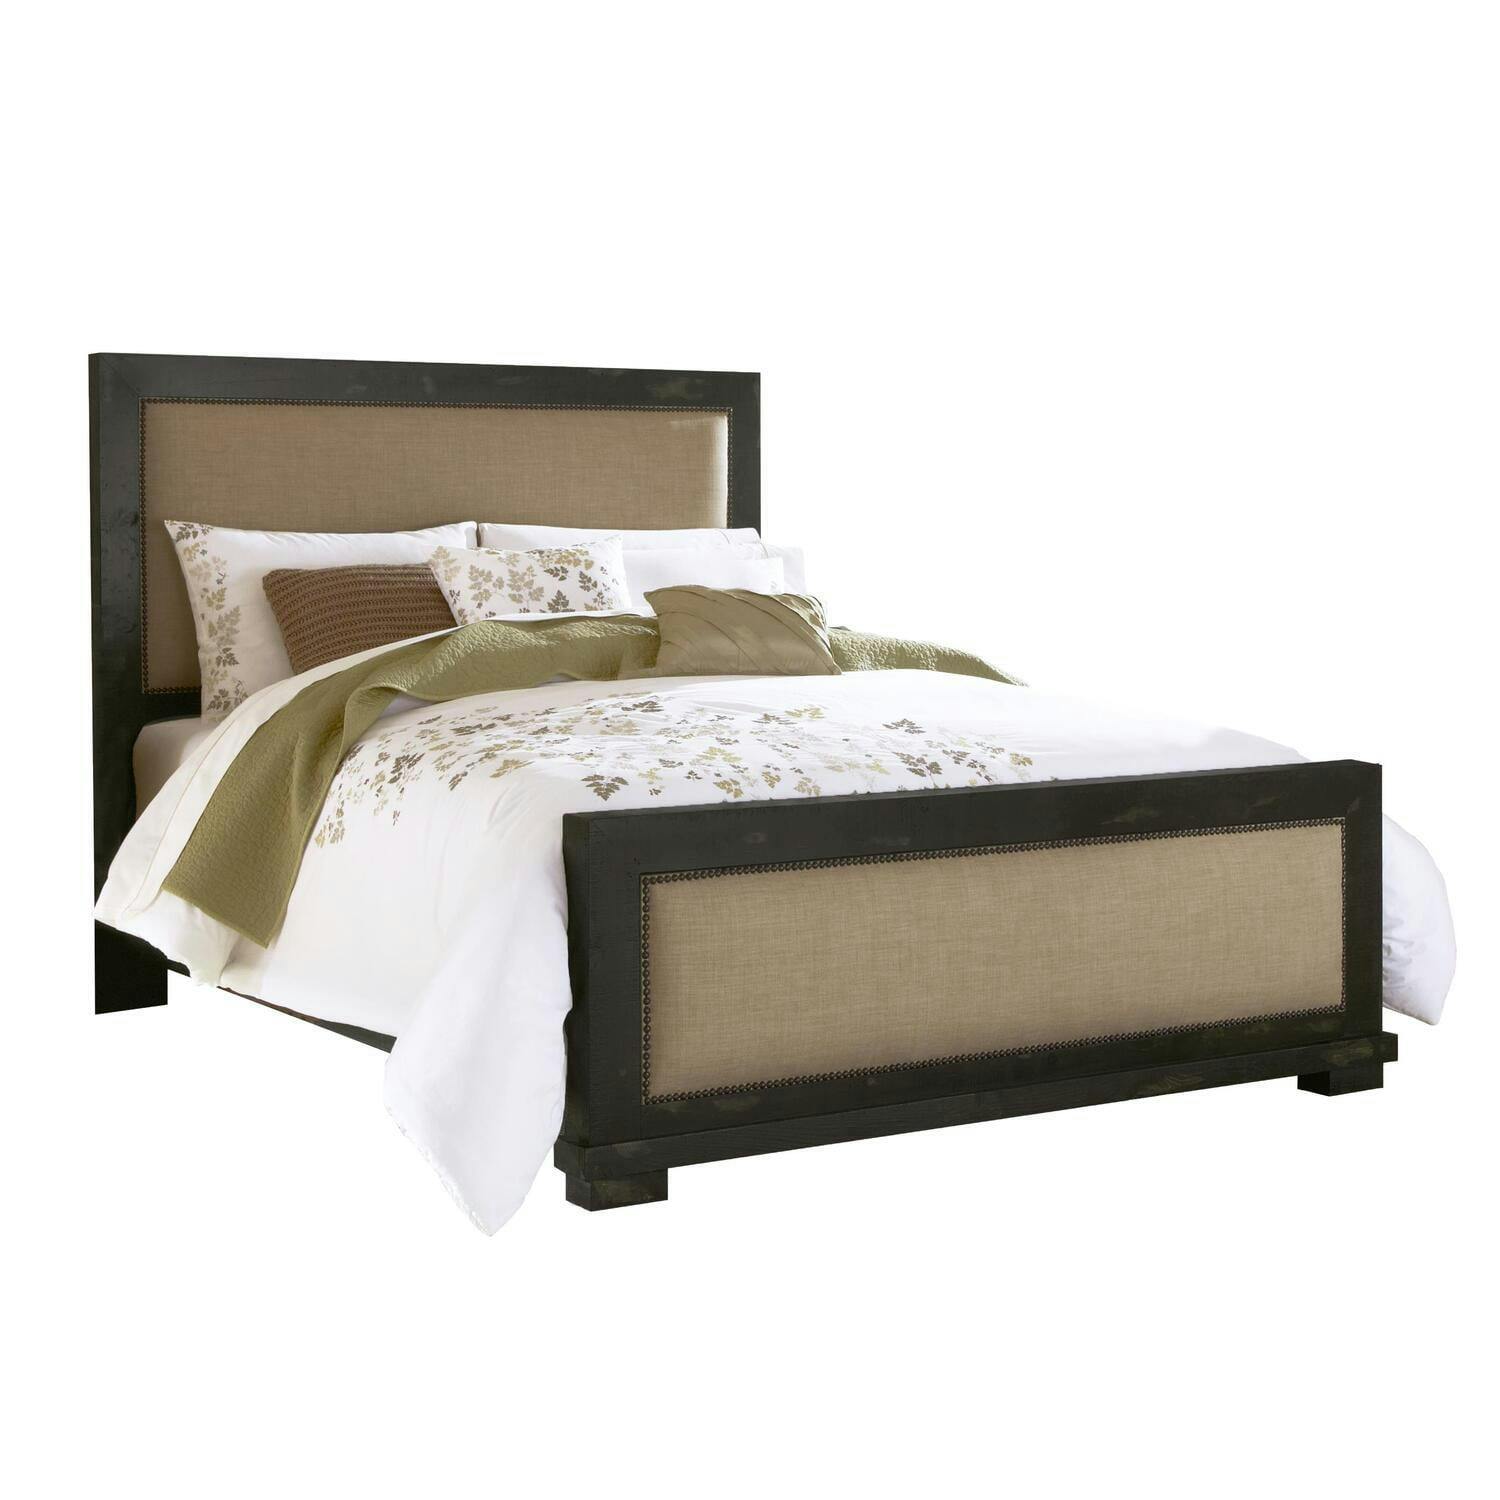 Wolferstorn Solid Wood and Upholstered Low Profile Standard Bed